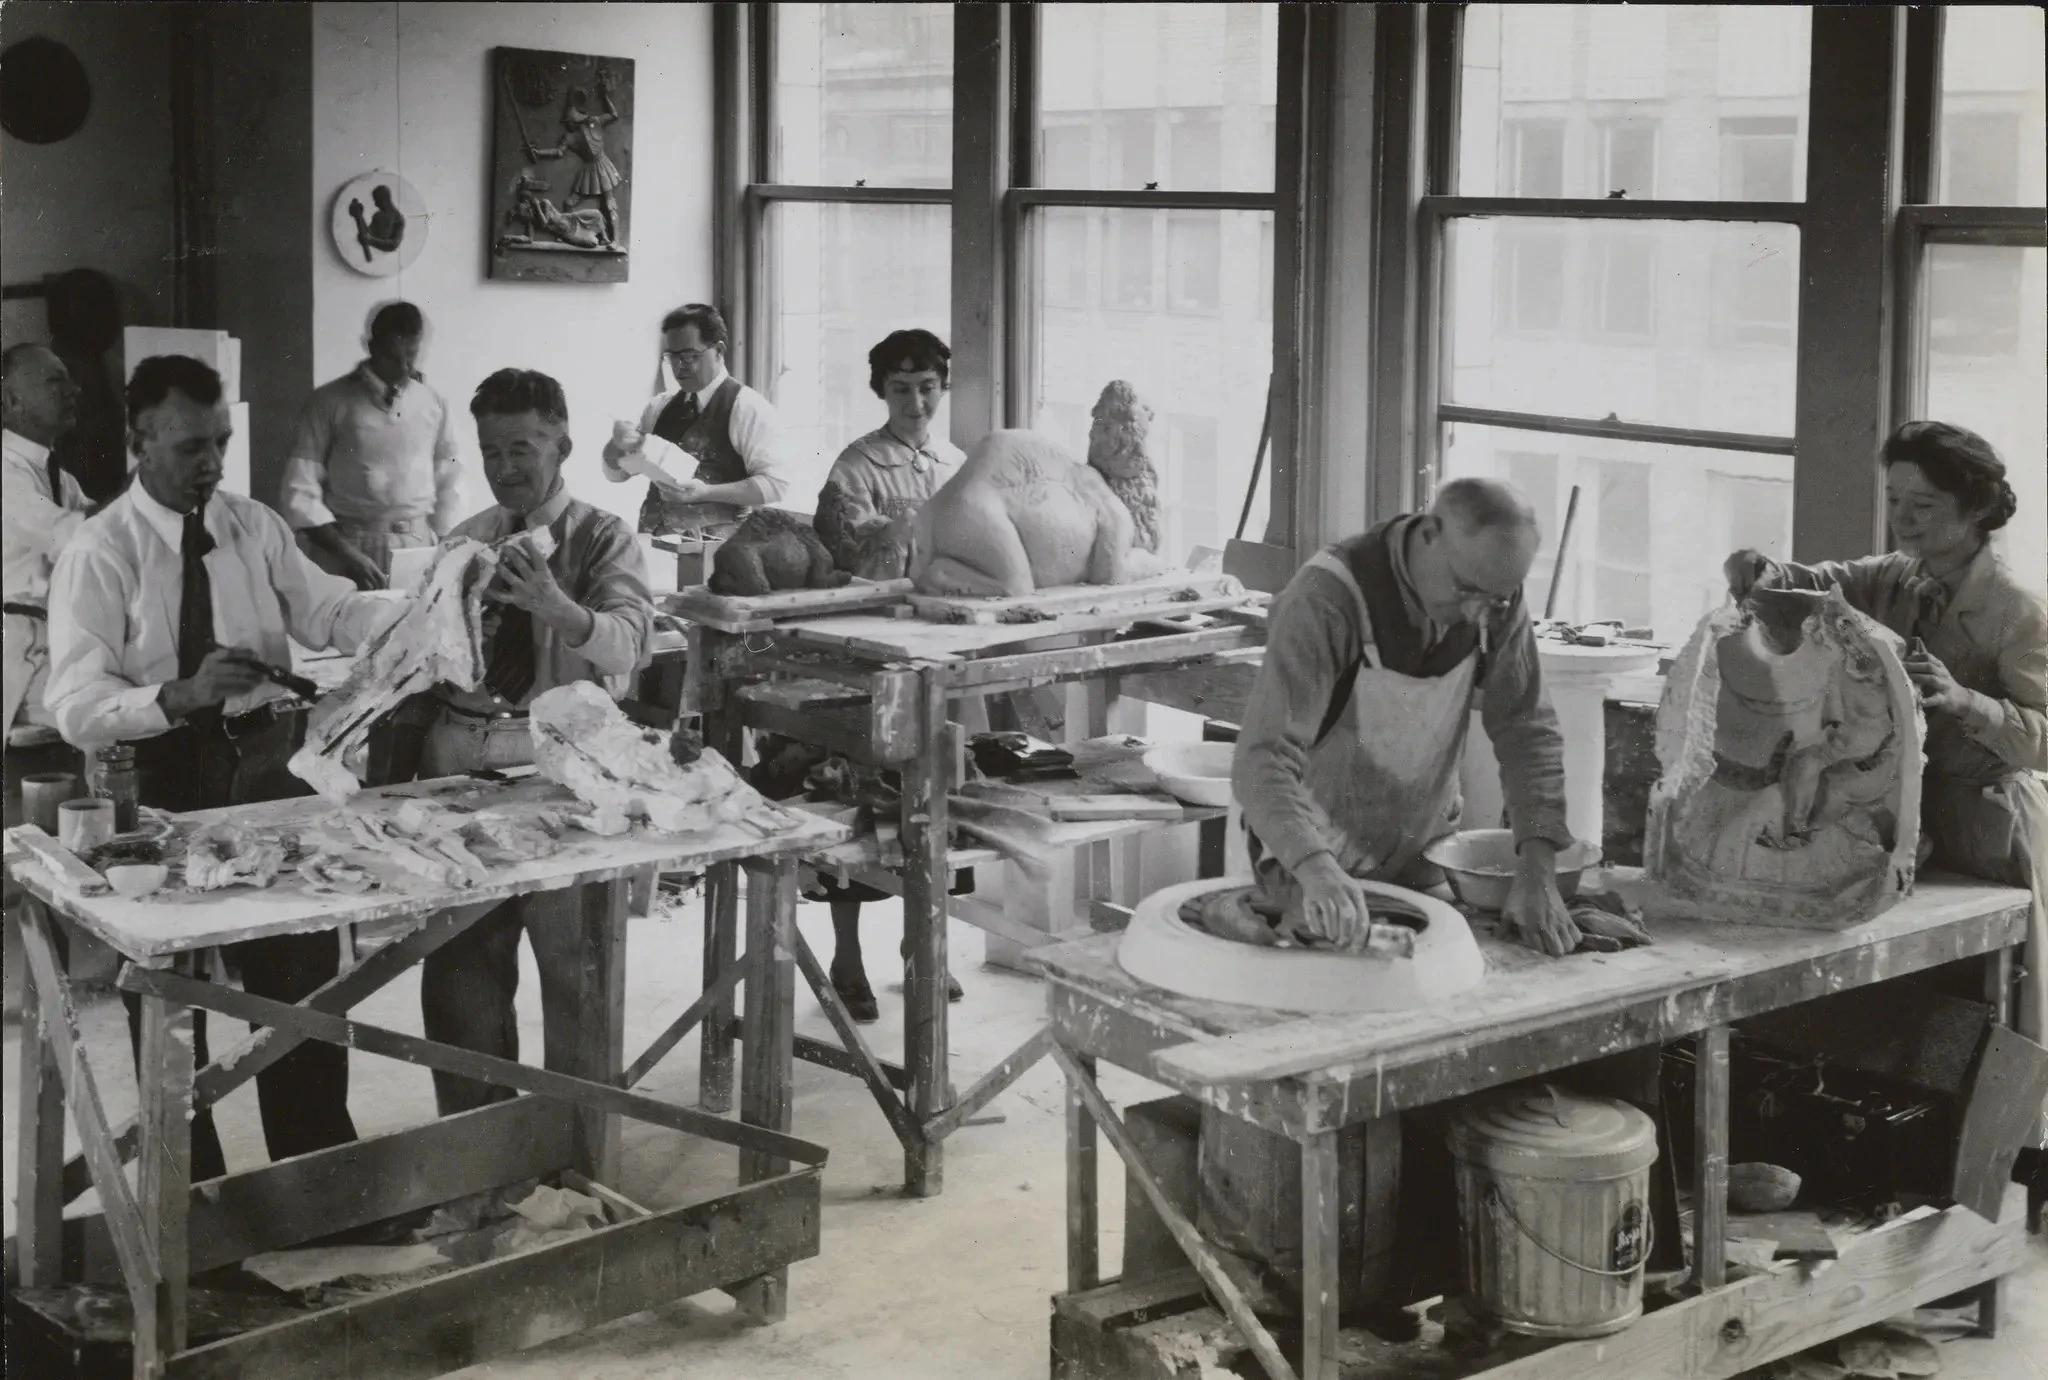 Artists work in pairs around small paint-stained benches in a messy studio. In black and white, their hair and clothes indicate that this photo was taken in the early 1900s. Artists work on various stages of sculptures. One artist paints a statue of a camel.